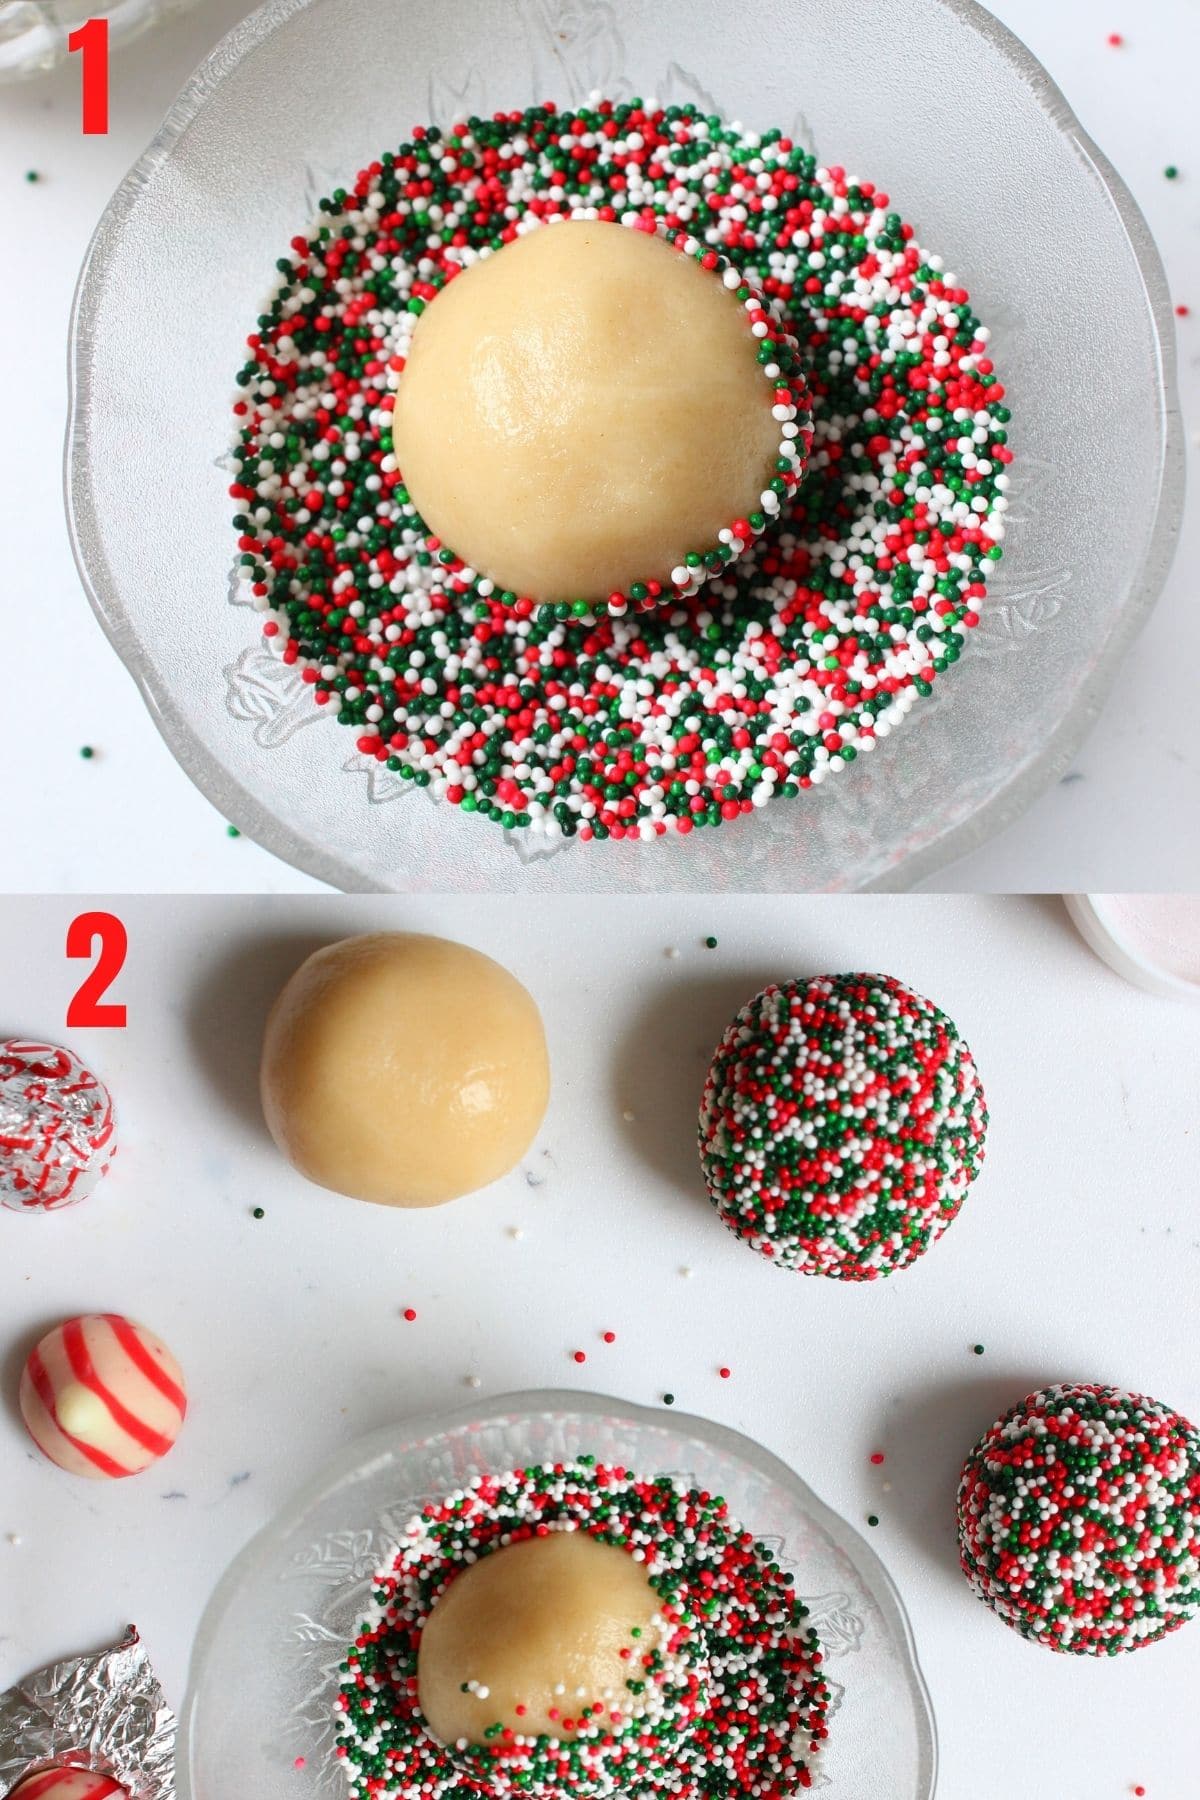 Rolling the cookie dough into balls and then rolling the balls in sprinkles.